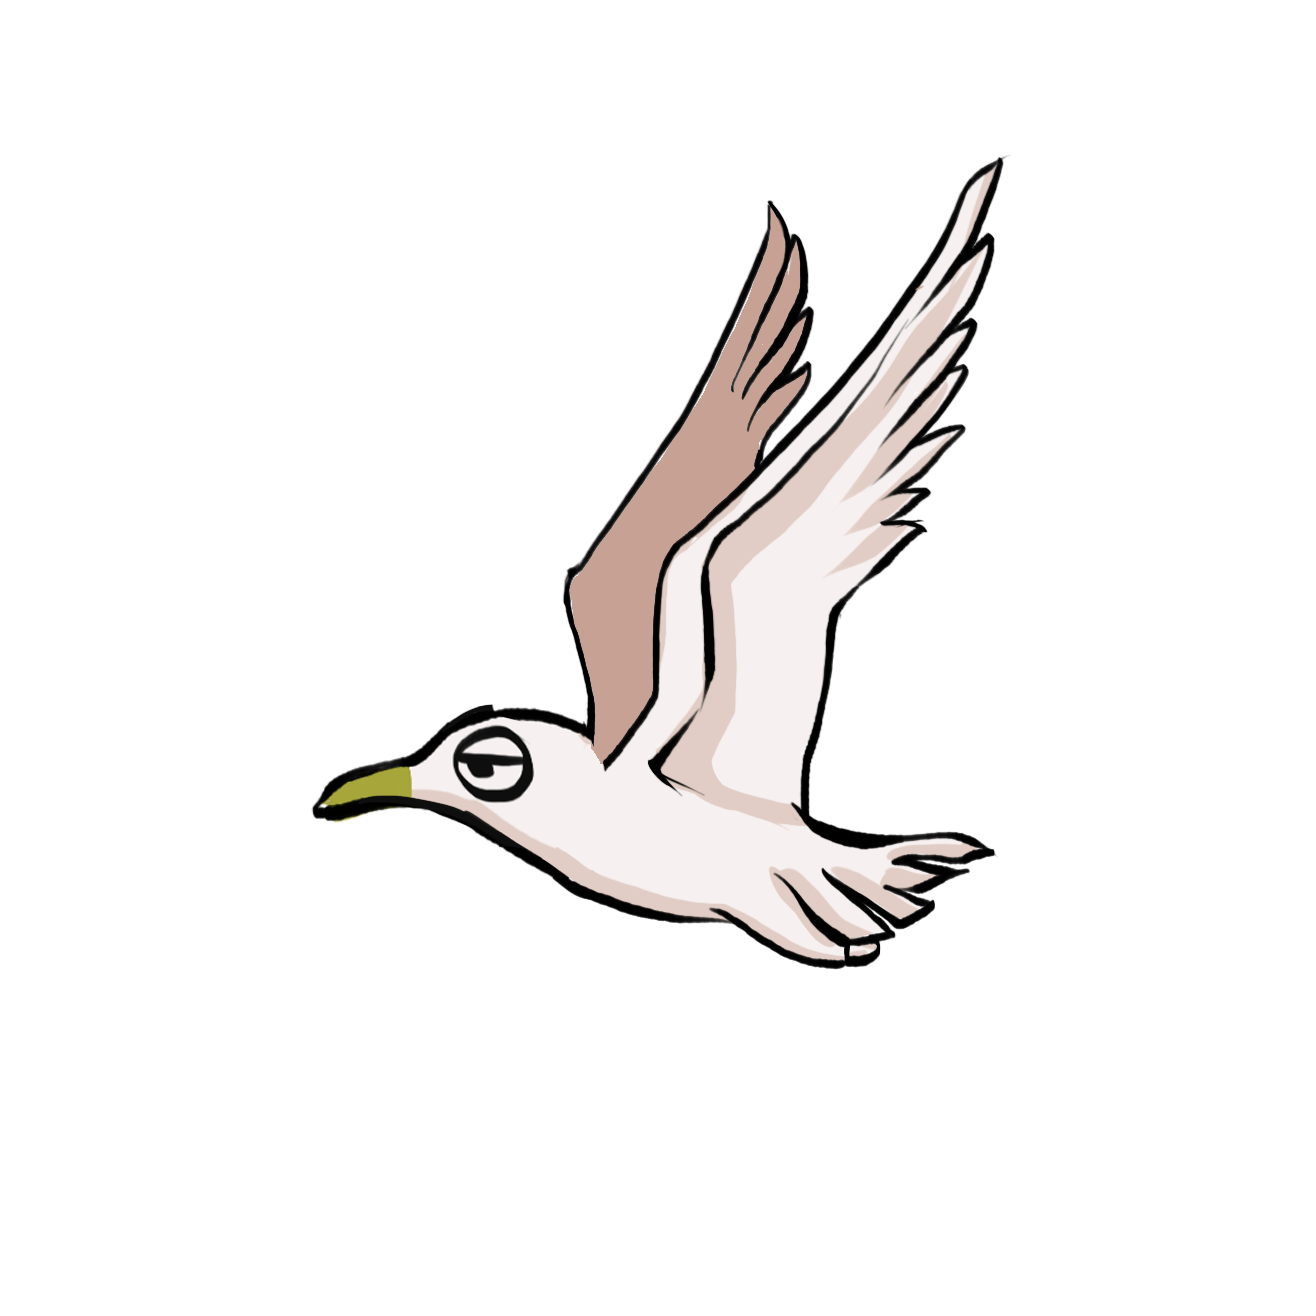 Seagull_1.png